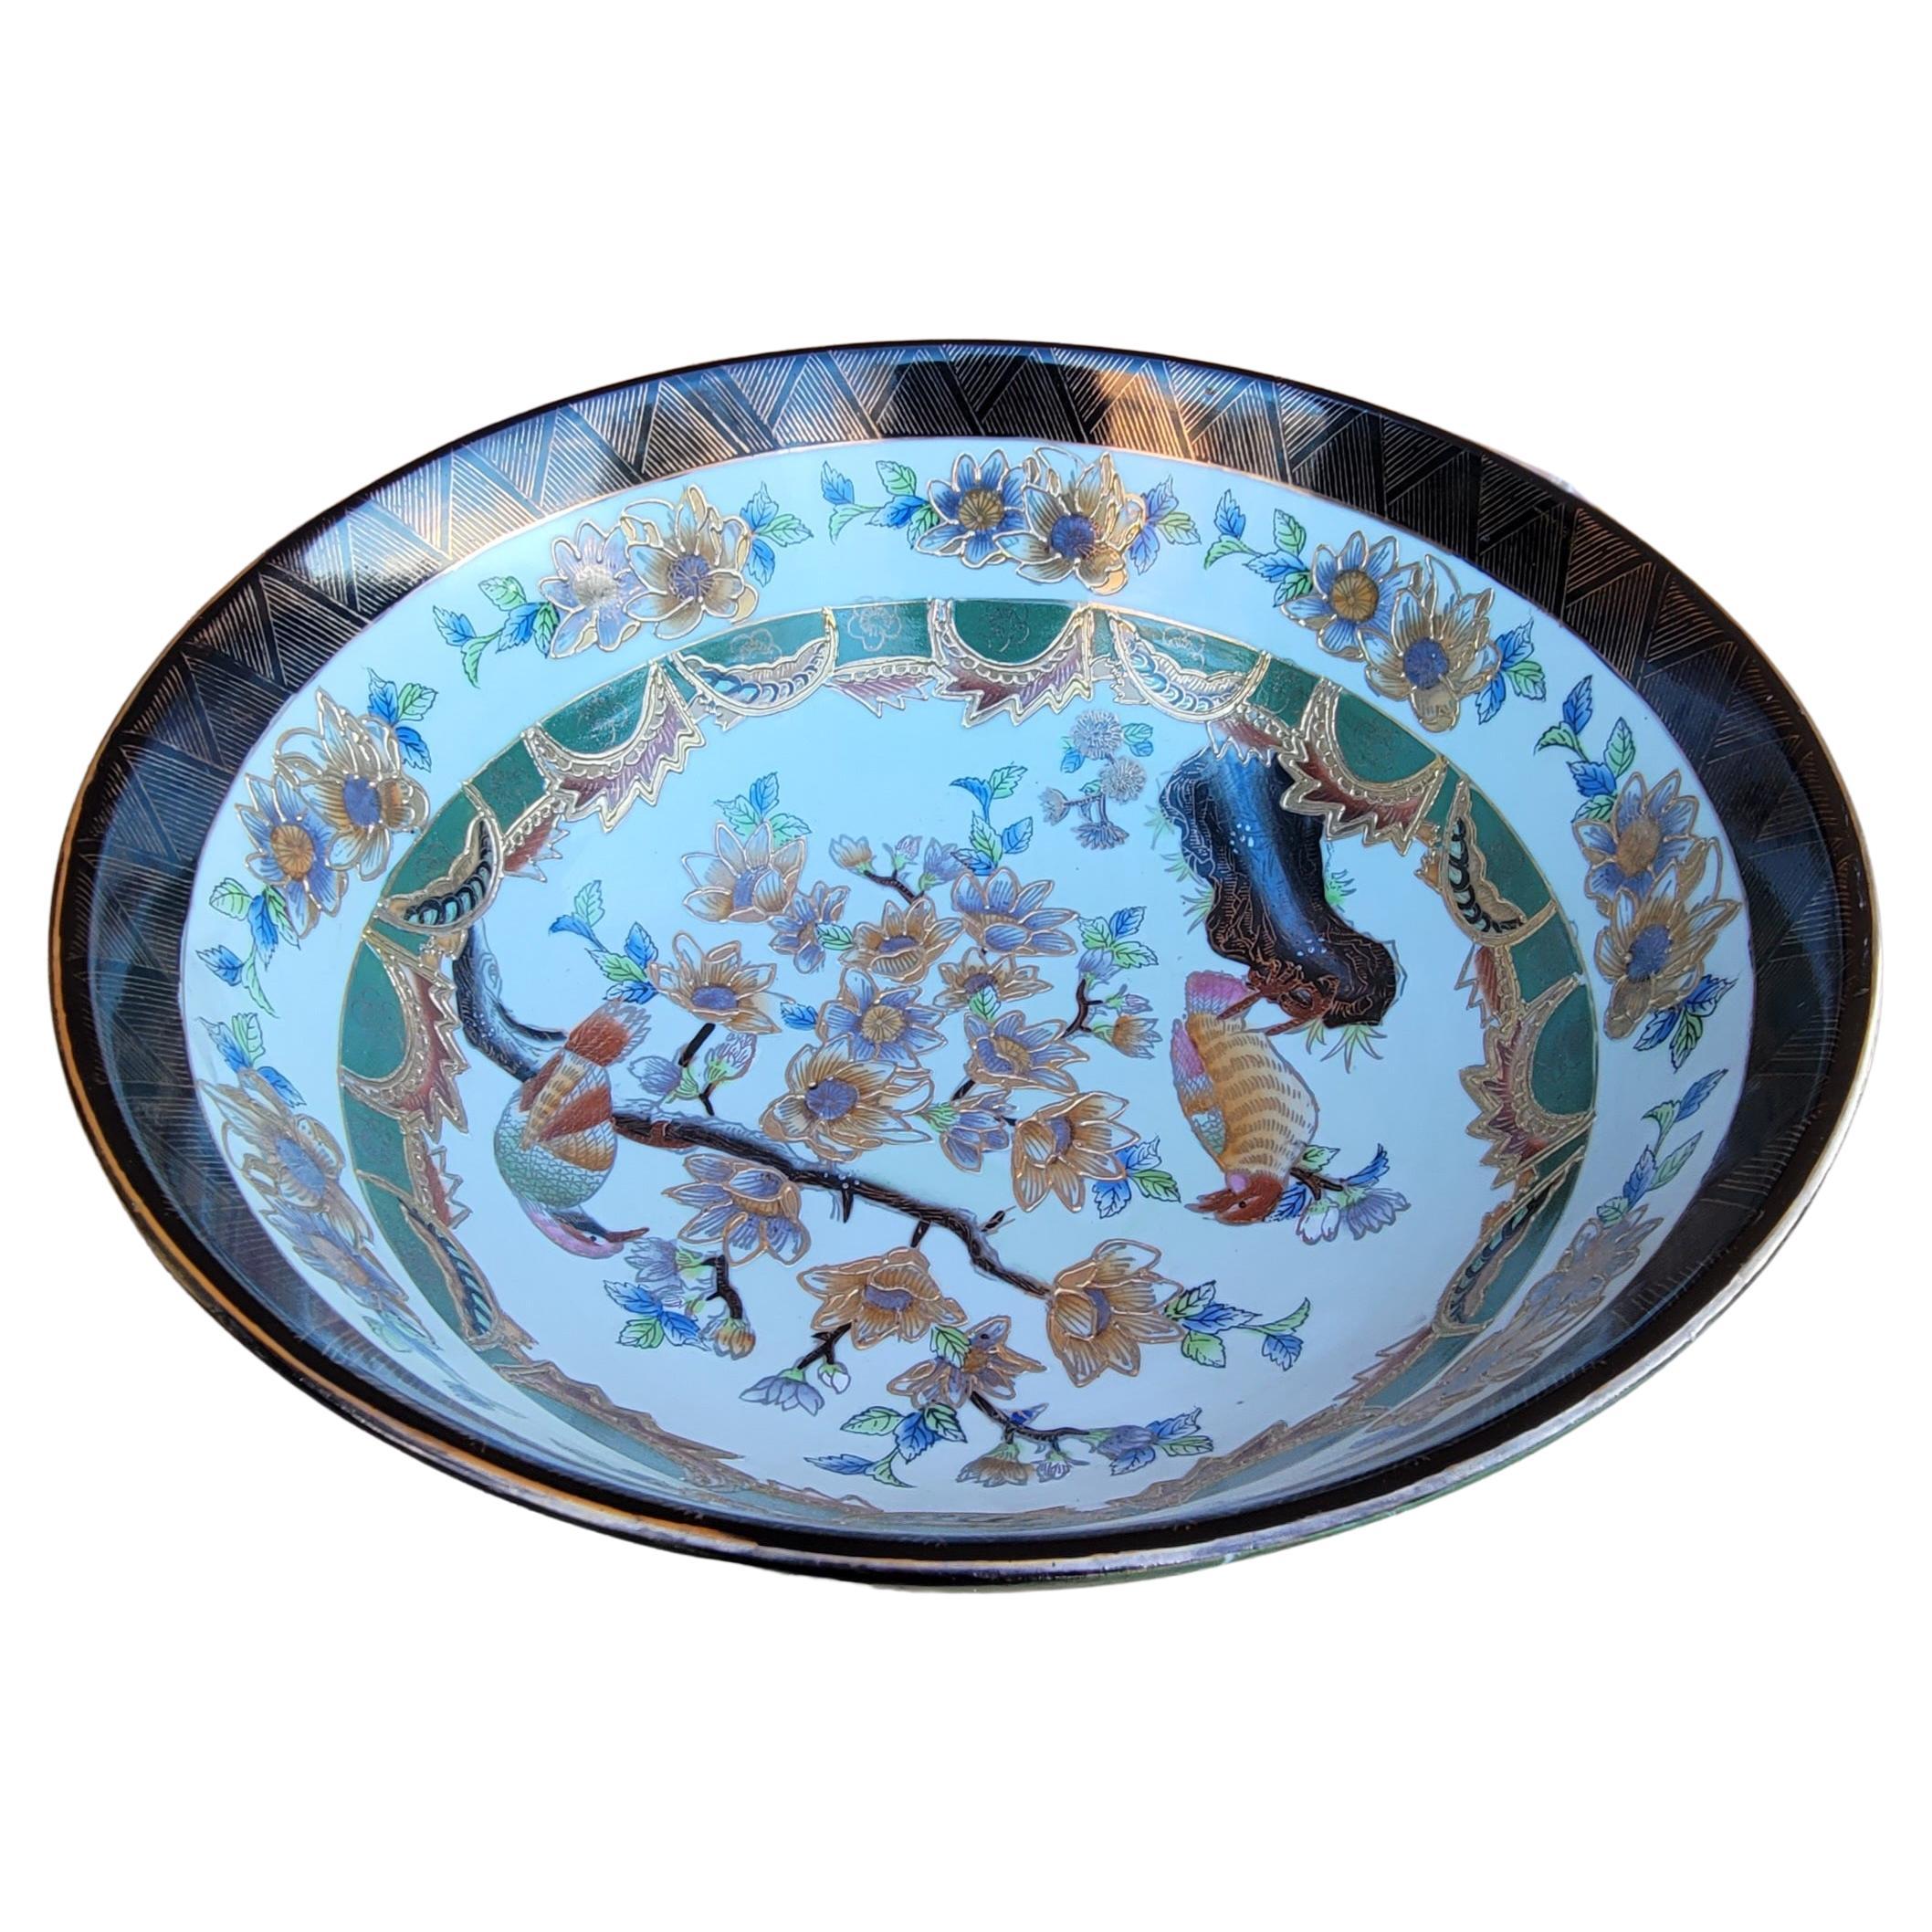 An exquisite large Hand-Painted Chinese Enamel And Gilt Decorated Porcelain Bowl with beautiful flower, birds and branches scenes. Hand-painted and numbered. No cracks or chips. Measures 14